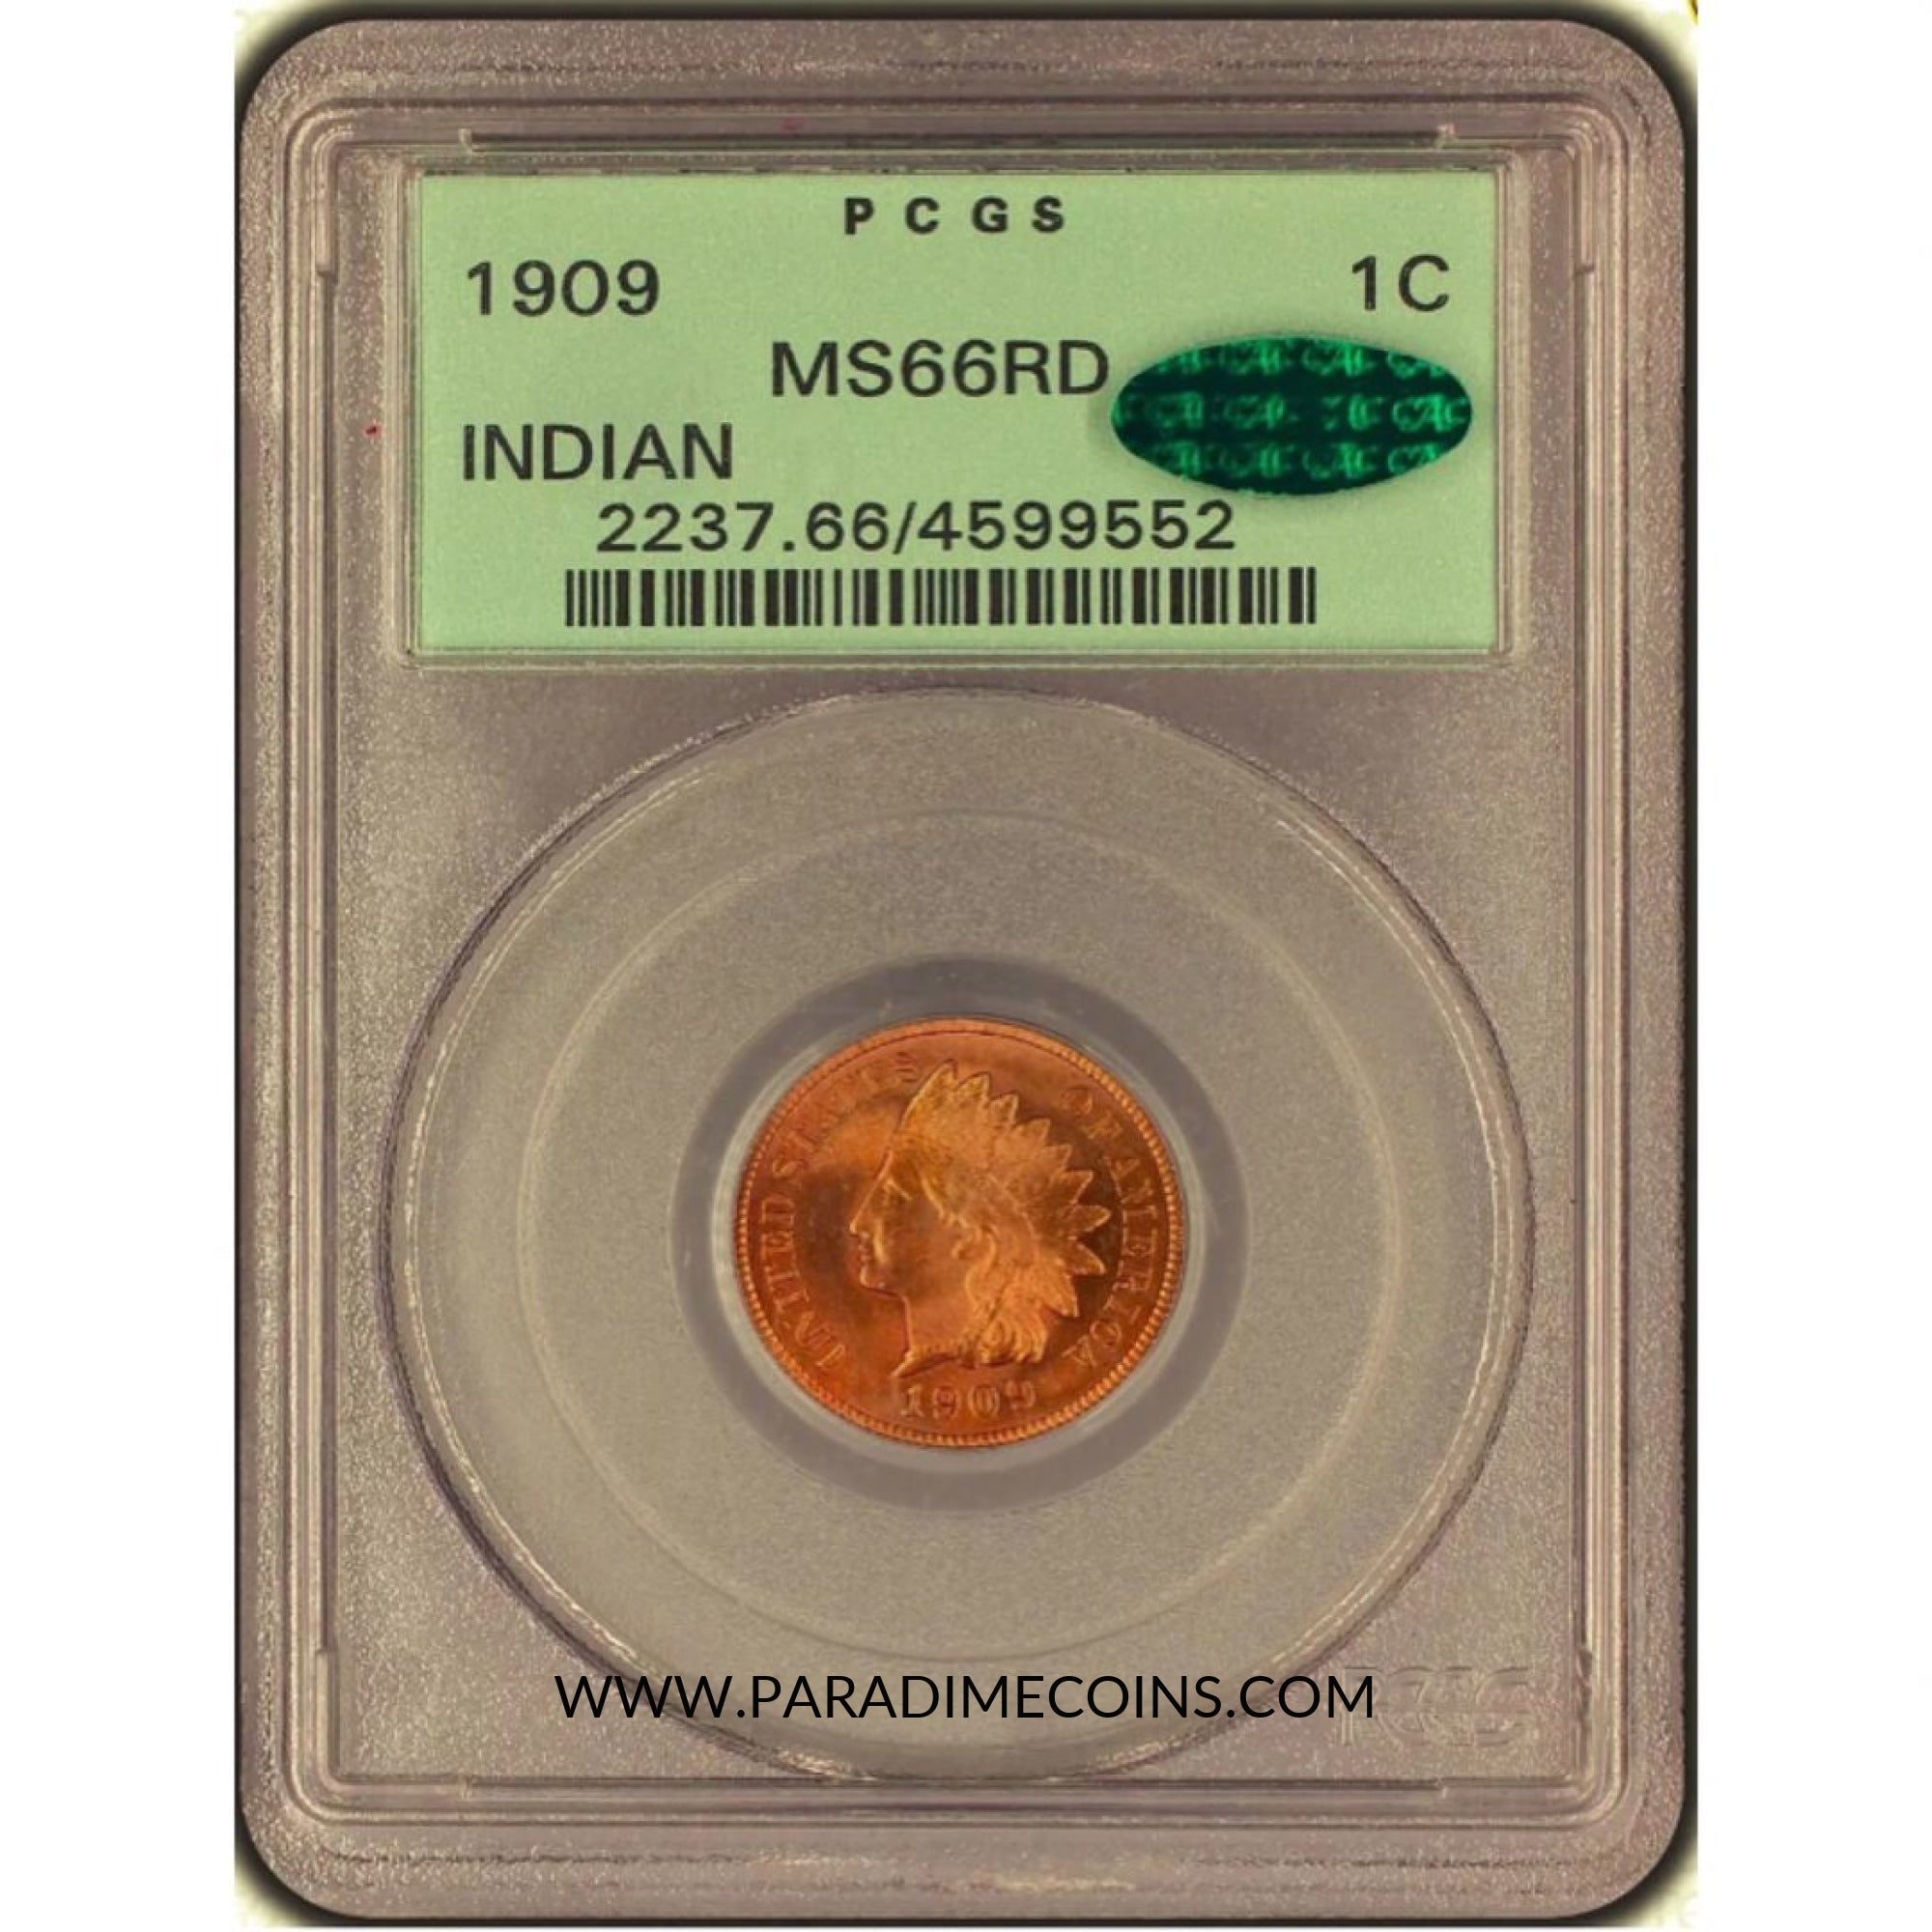 1909 1C MS66 RED PCGS CAC - Paradime Coins | PCGS NGC CACG CAC Rare US Numismatic Coins For Sale